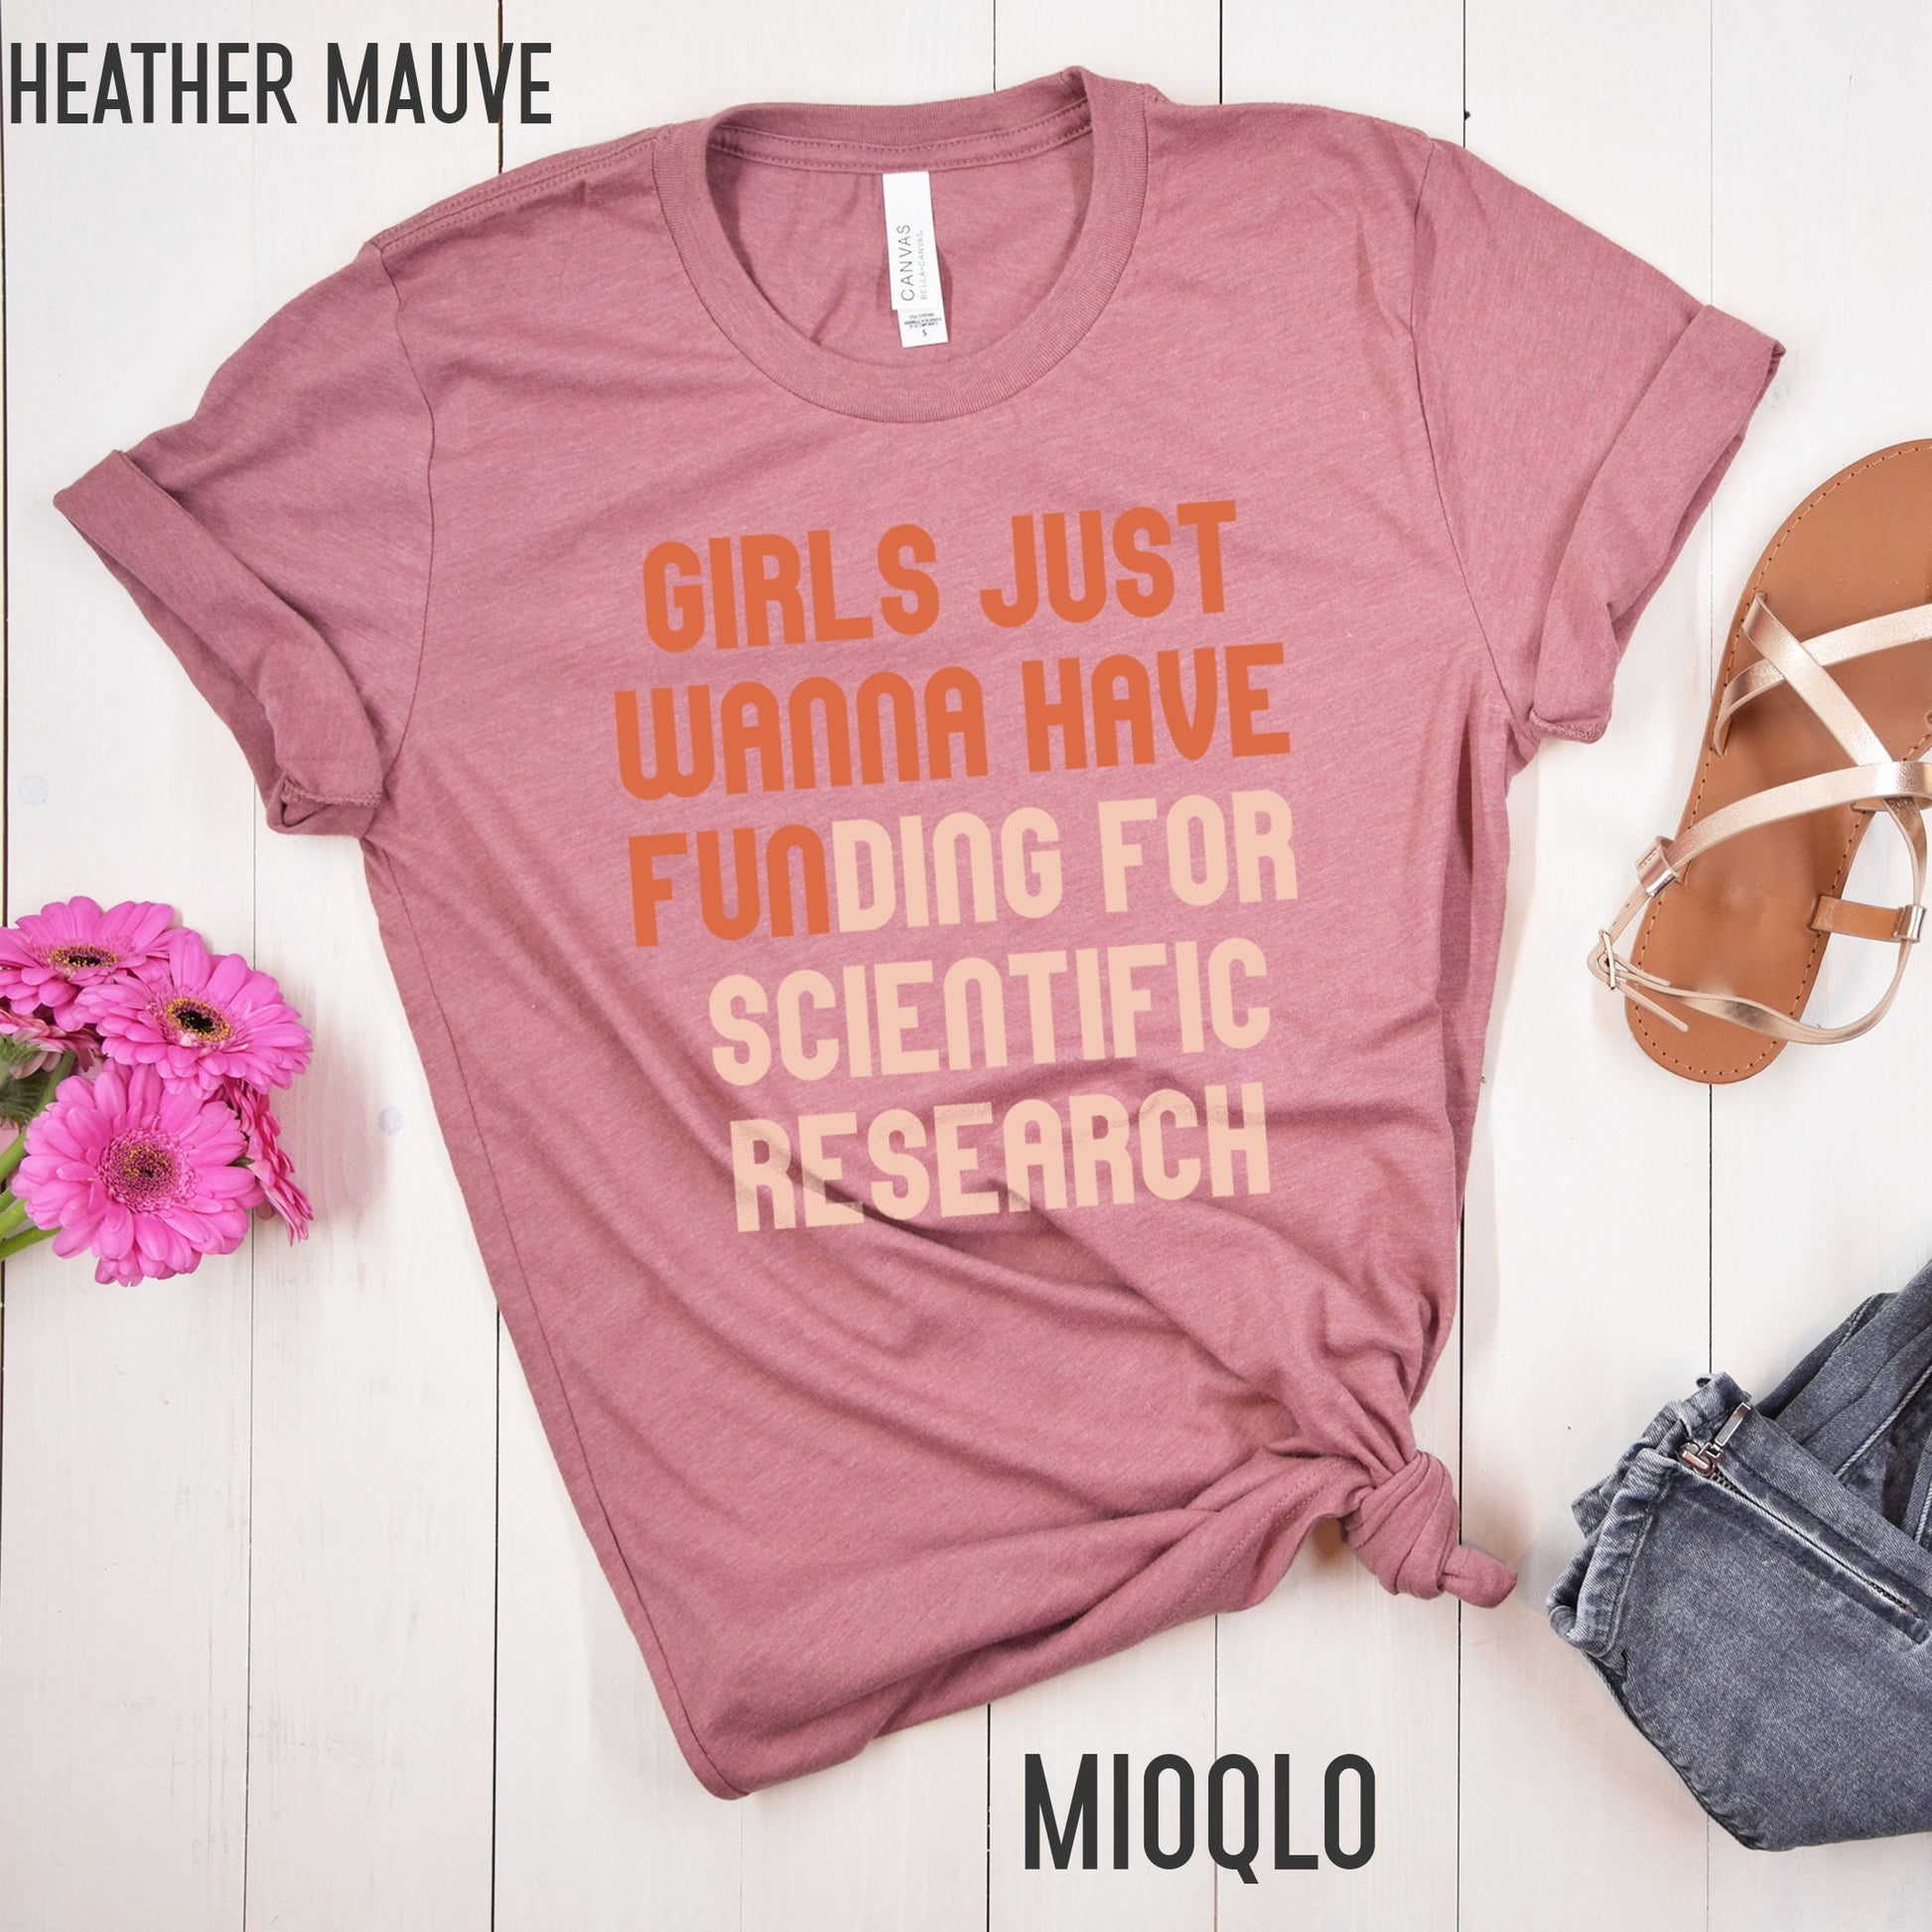 Girls Just Wanna Have Funding For Scientific Research, Science Shirt, Tank Top, Phd Student, Grad, Doctorate Gifts, Graduate Degree Student